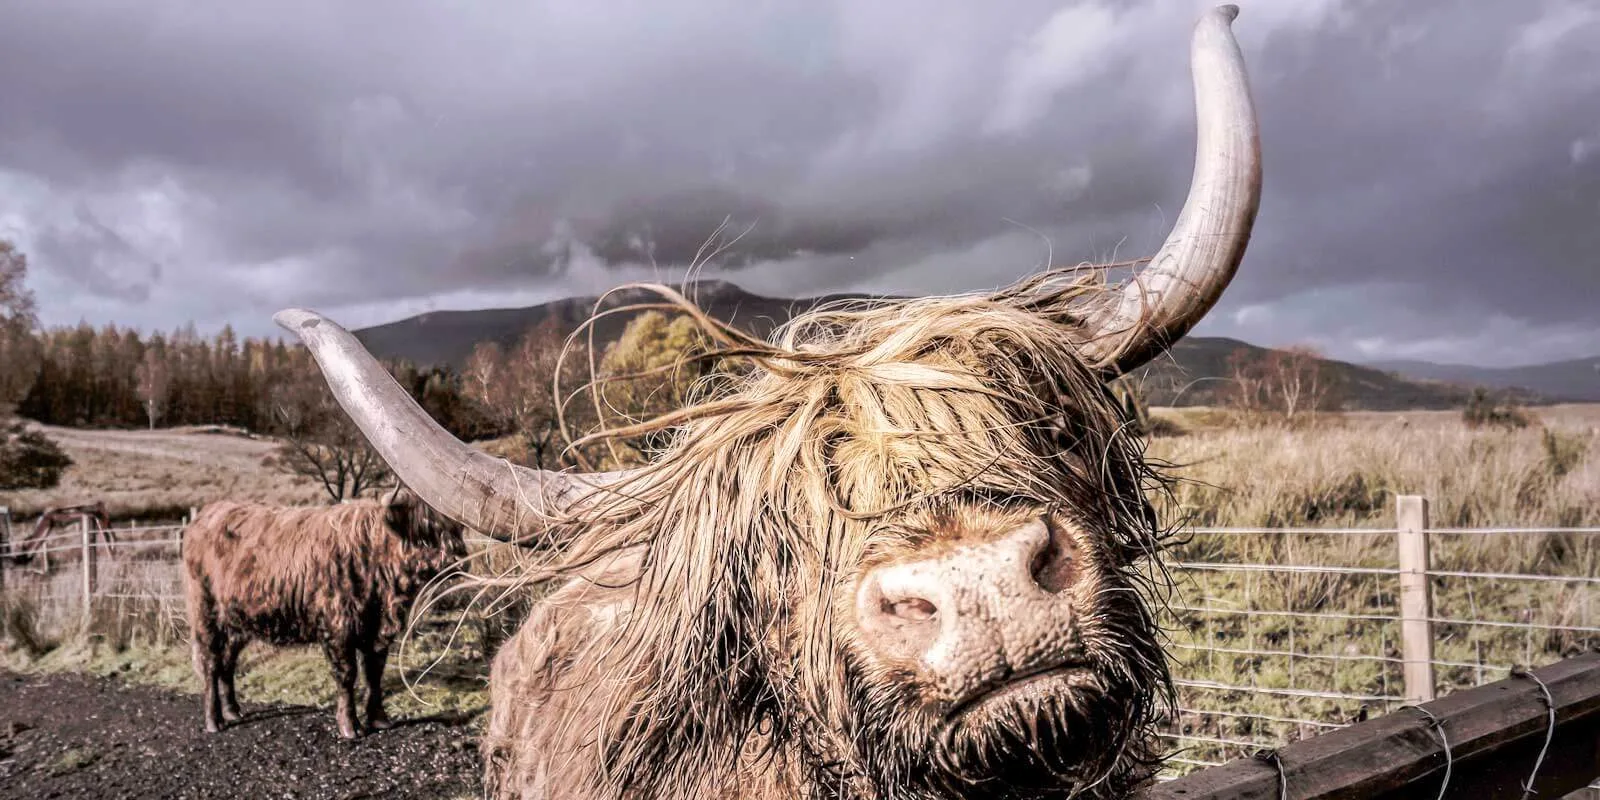 Closeup of a Scottish Highland cattle with long hair and big horns.